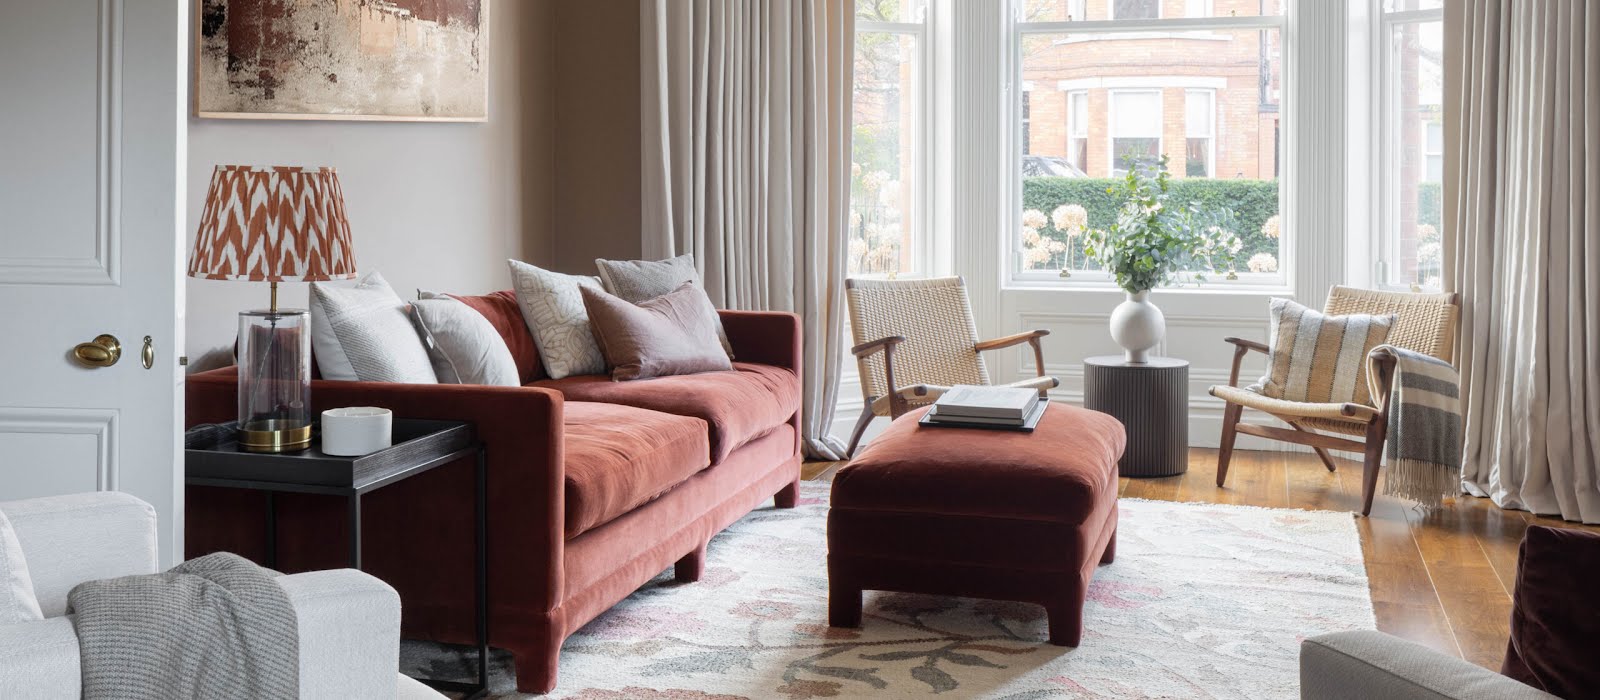 This Dublin home has been given a makeover full of warm tones and inviting textures